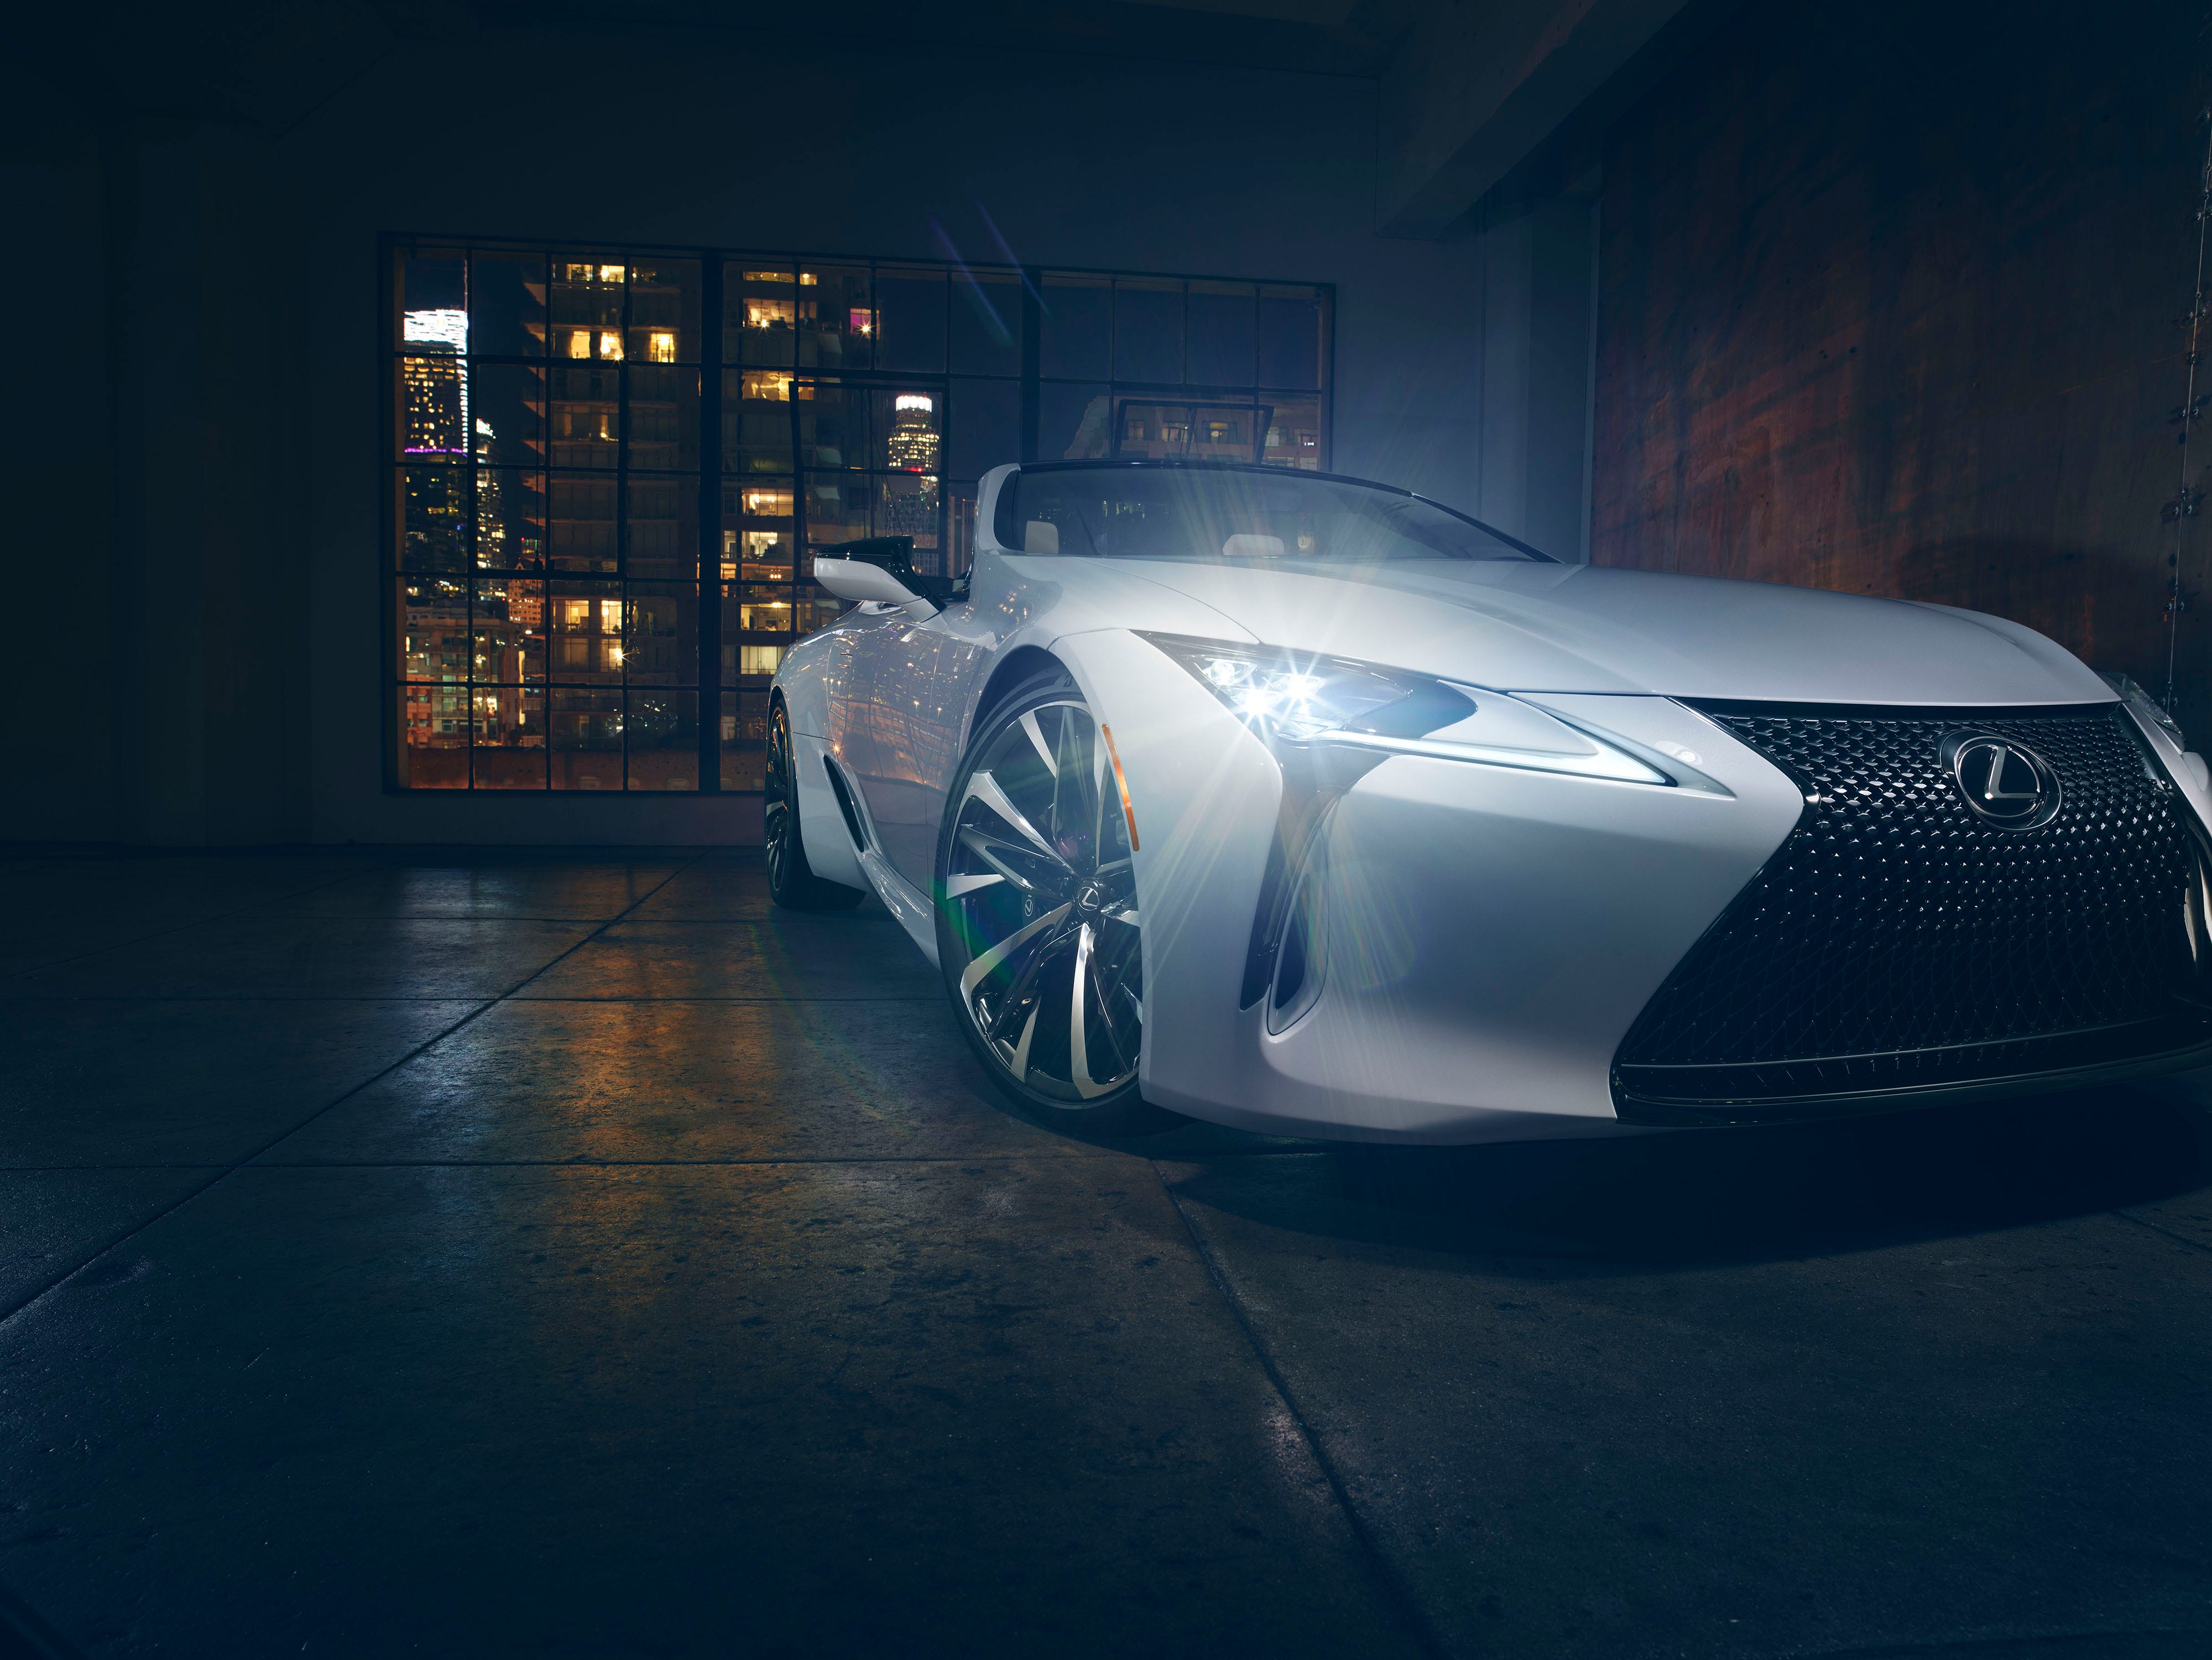 The Lexus LC Convertible Concept will make its debut at the 2019 North American International Auto Show.